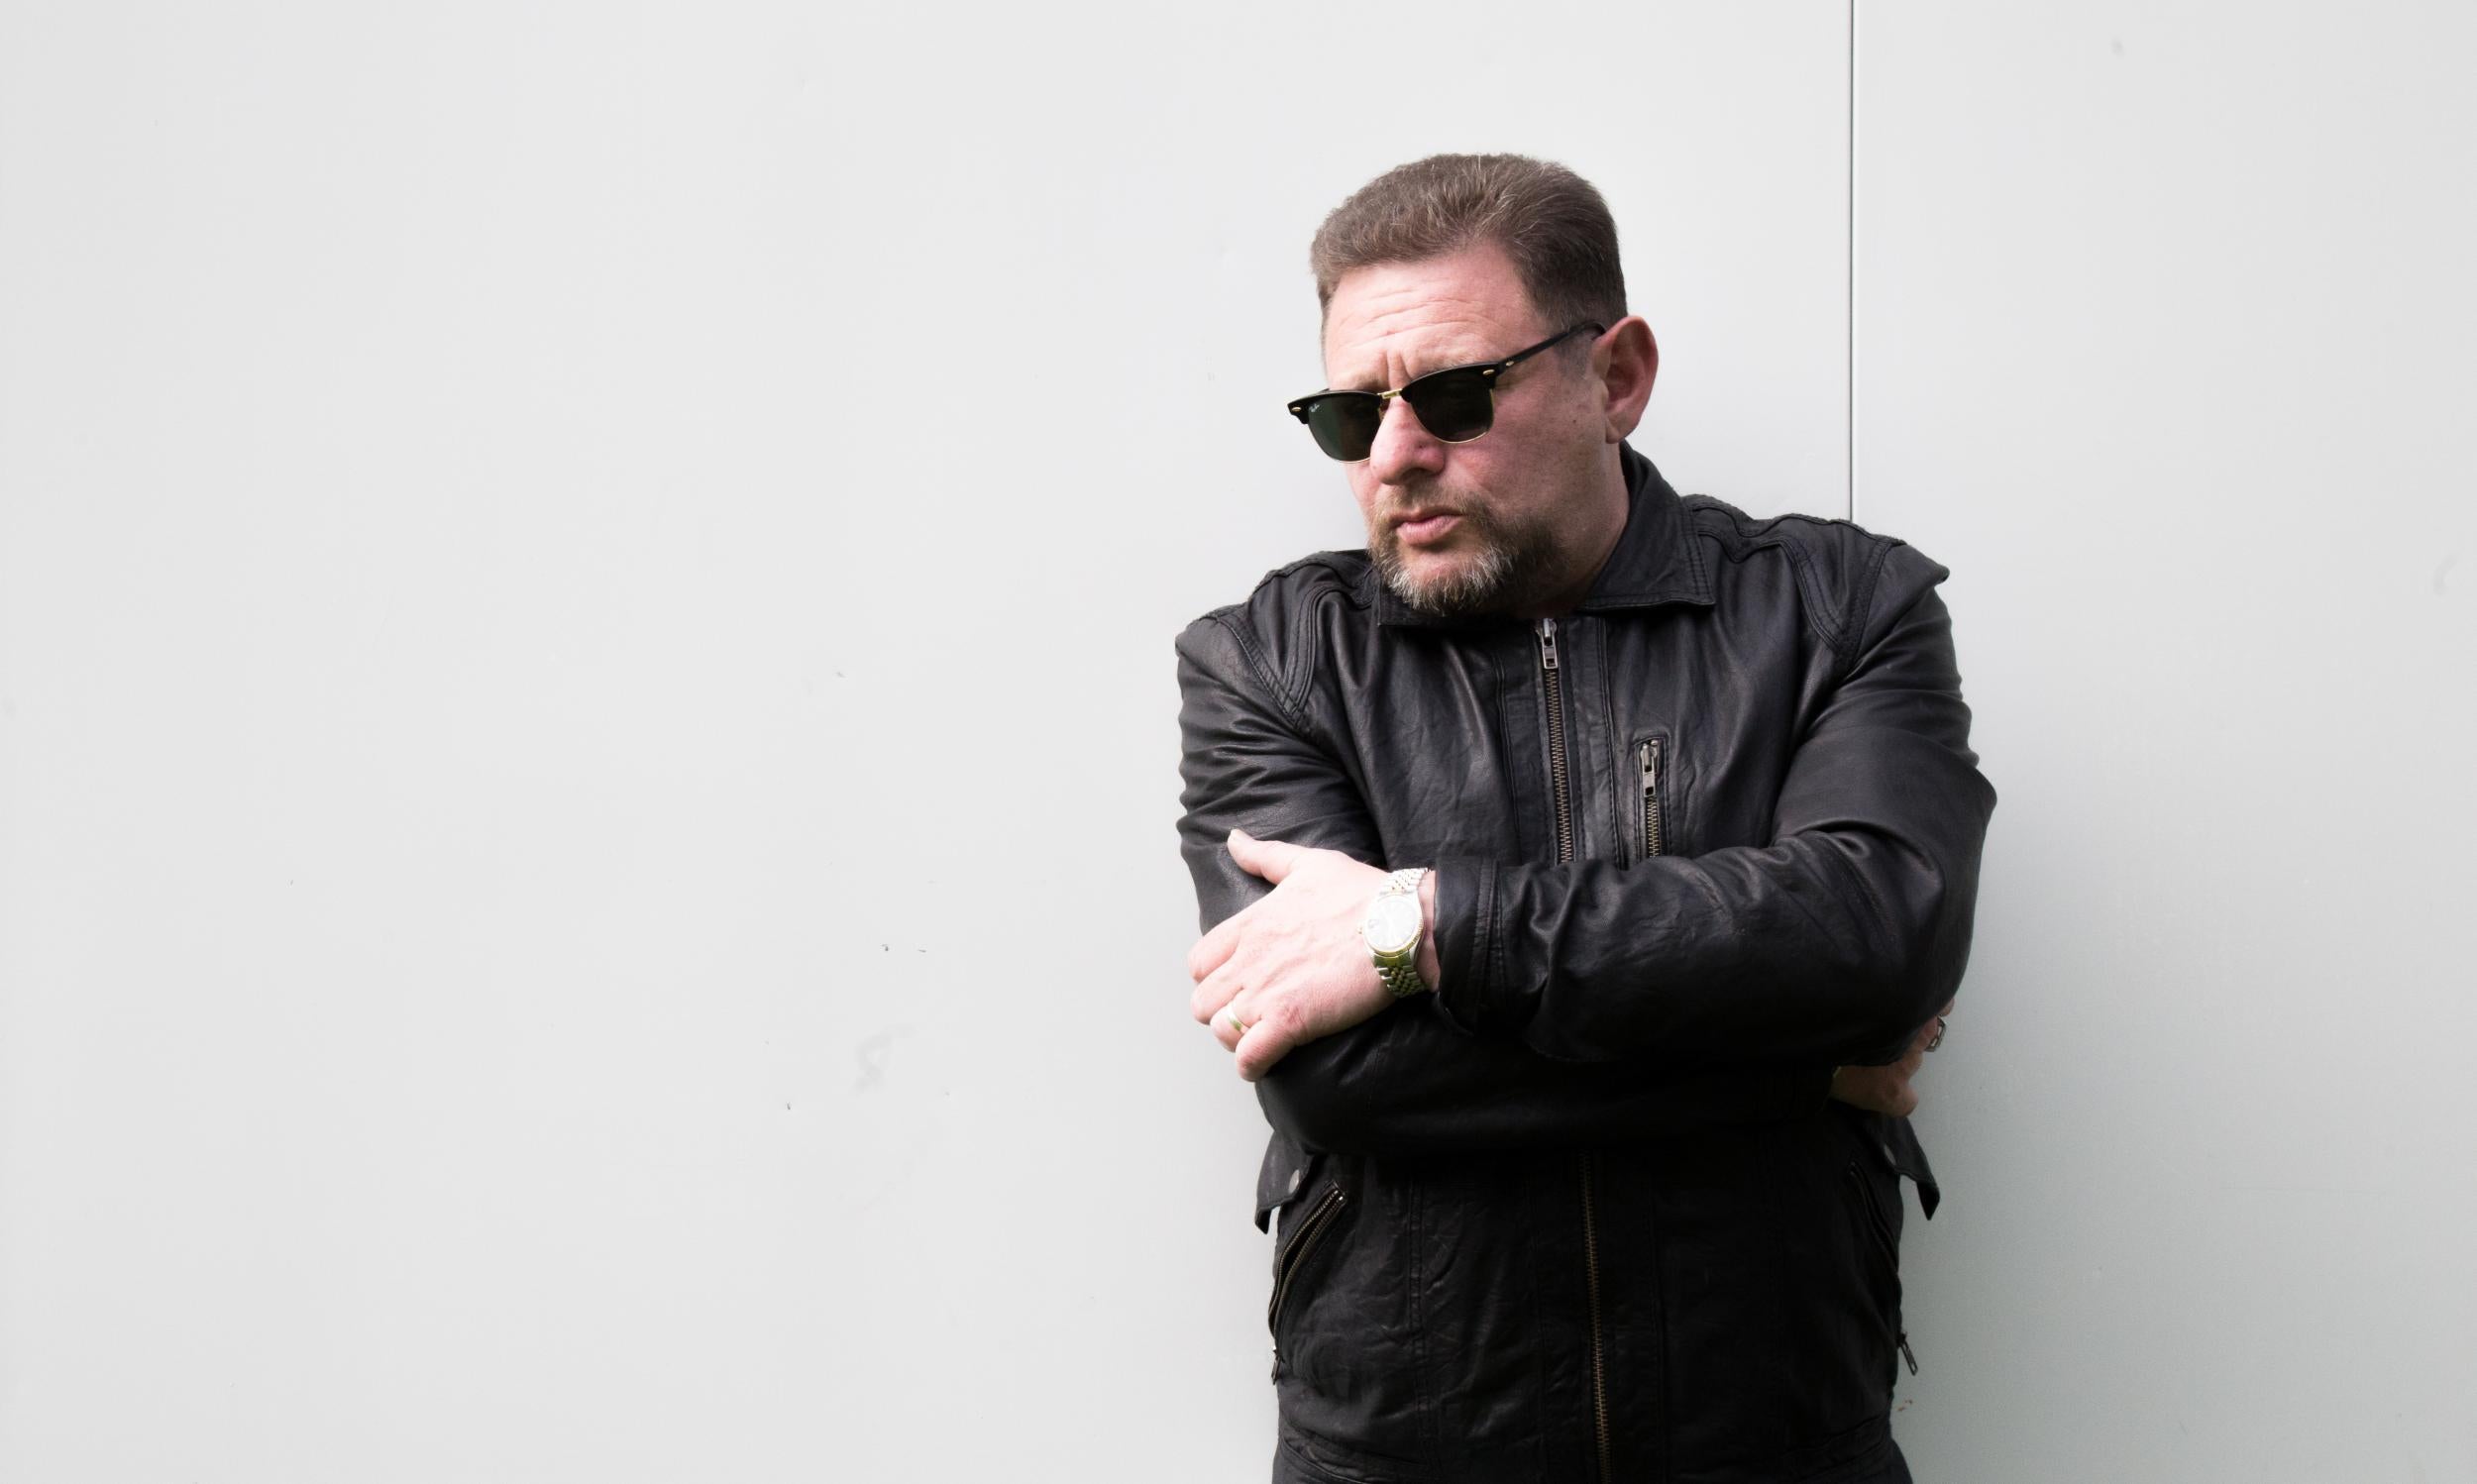 The Happy Mondays’ frontman, Shaun Ryder, is due to publish a lyric book later this year (Elspeth Moore)